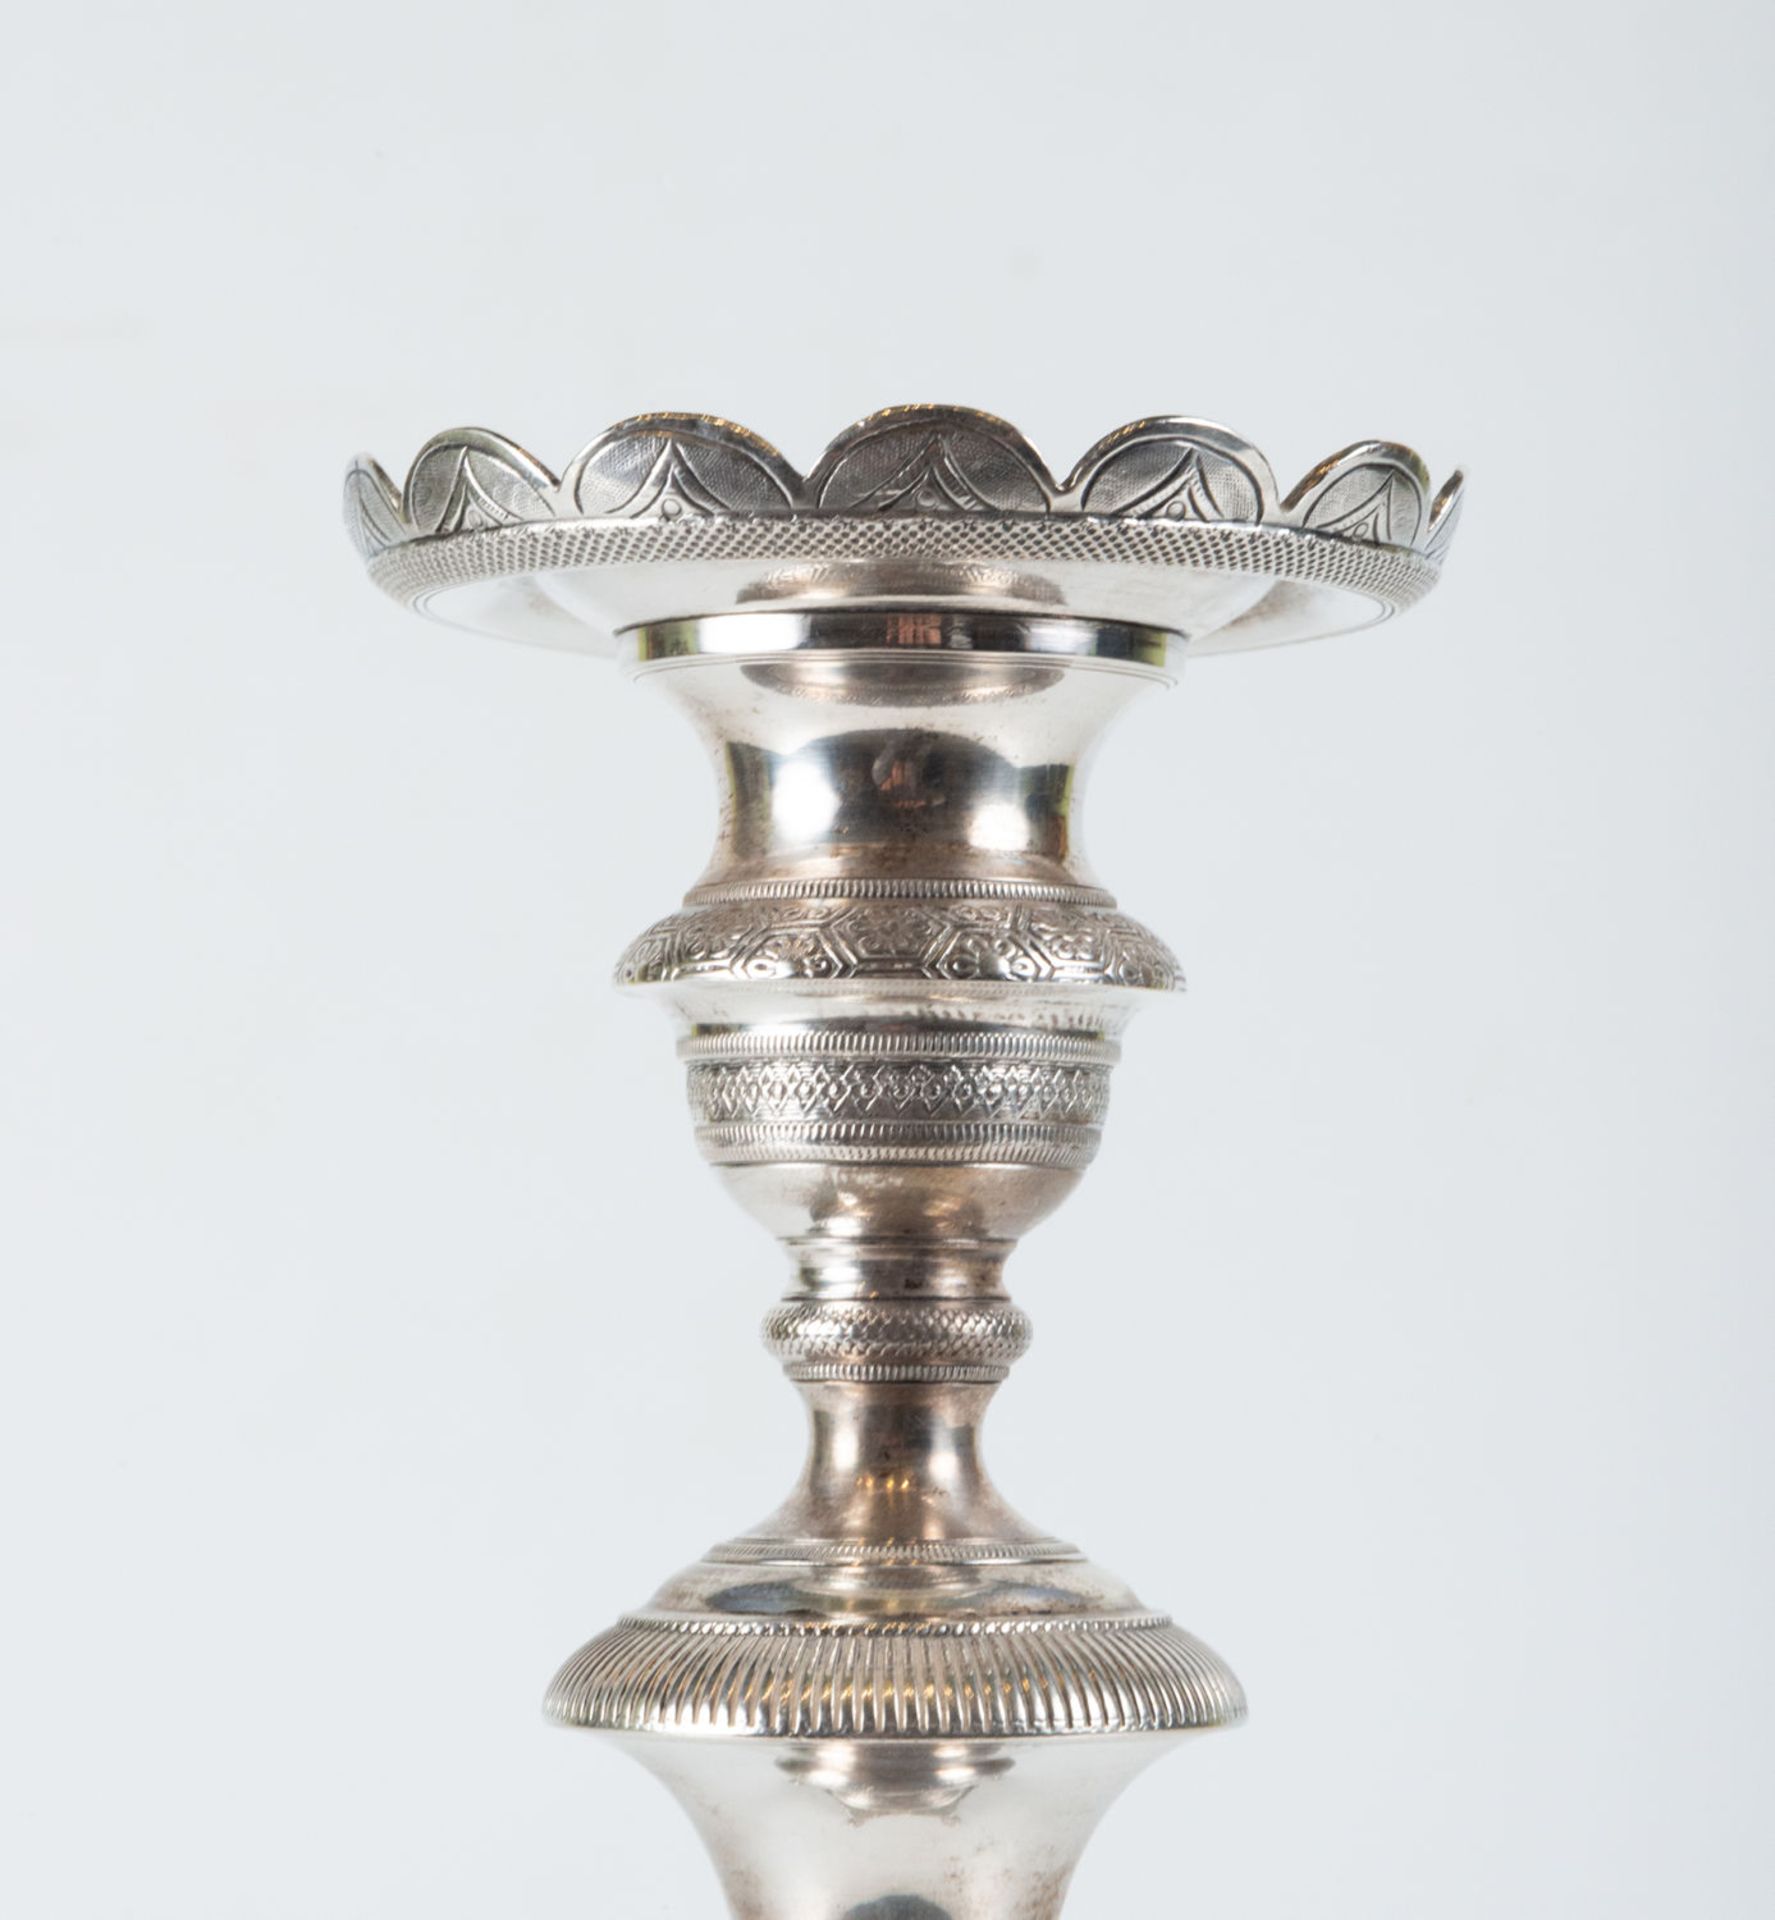 Pair of solid sterling silver candlesticks, 19th century - Image 4 of 9